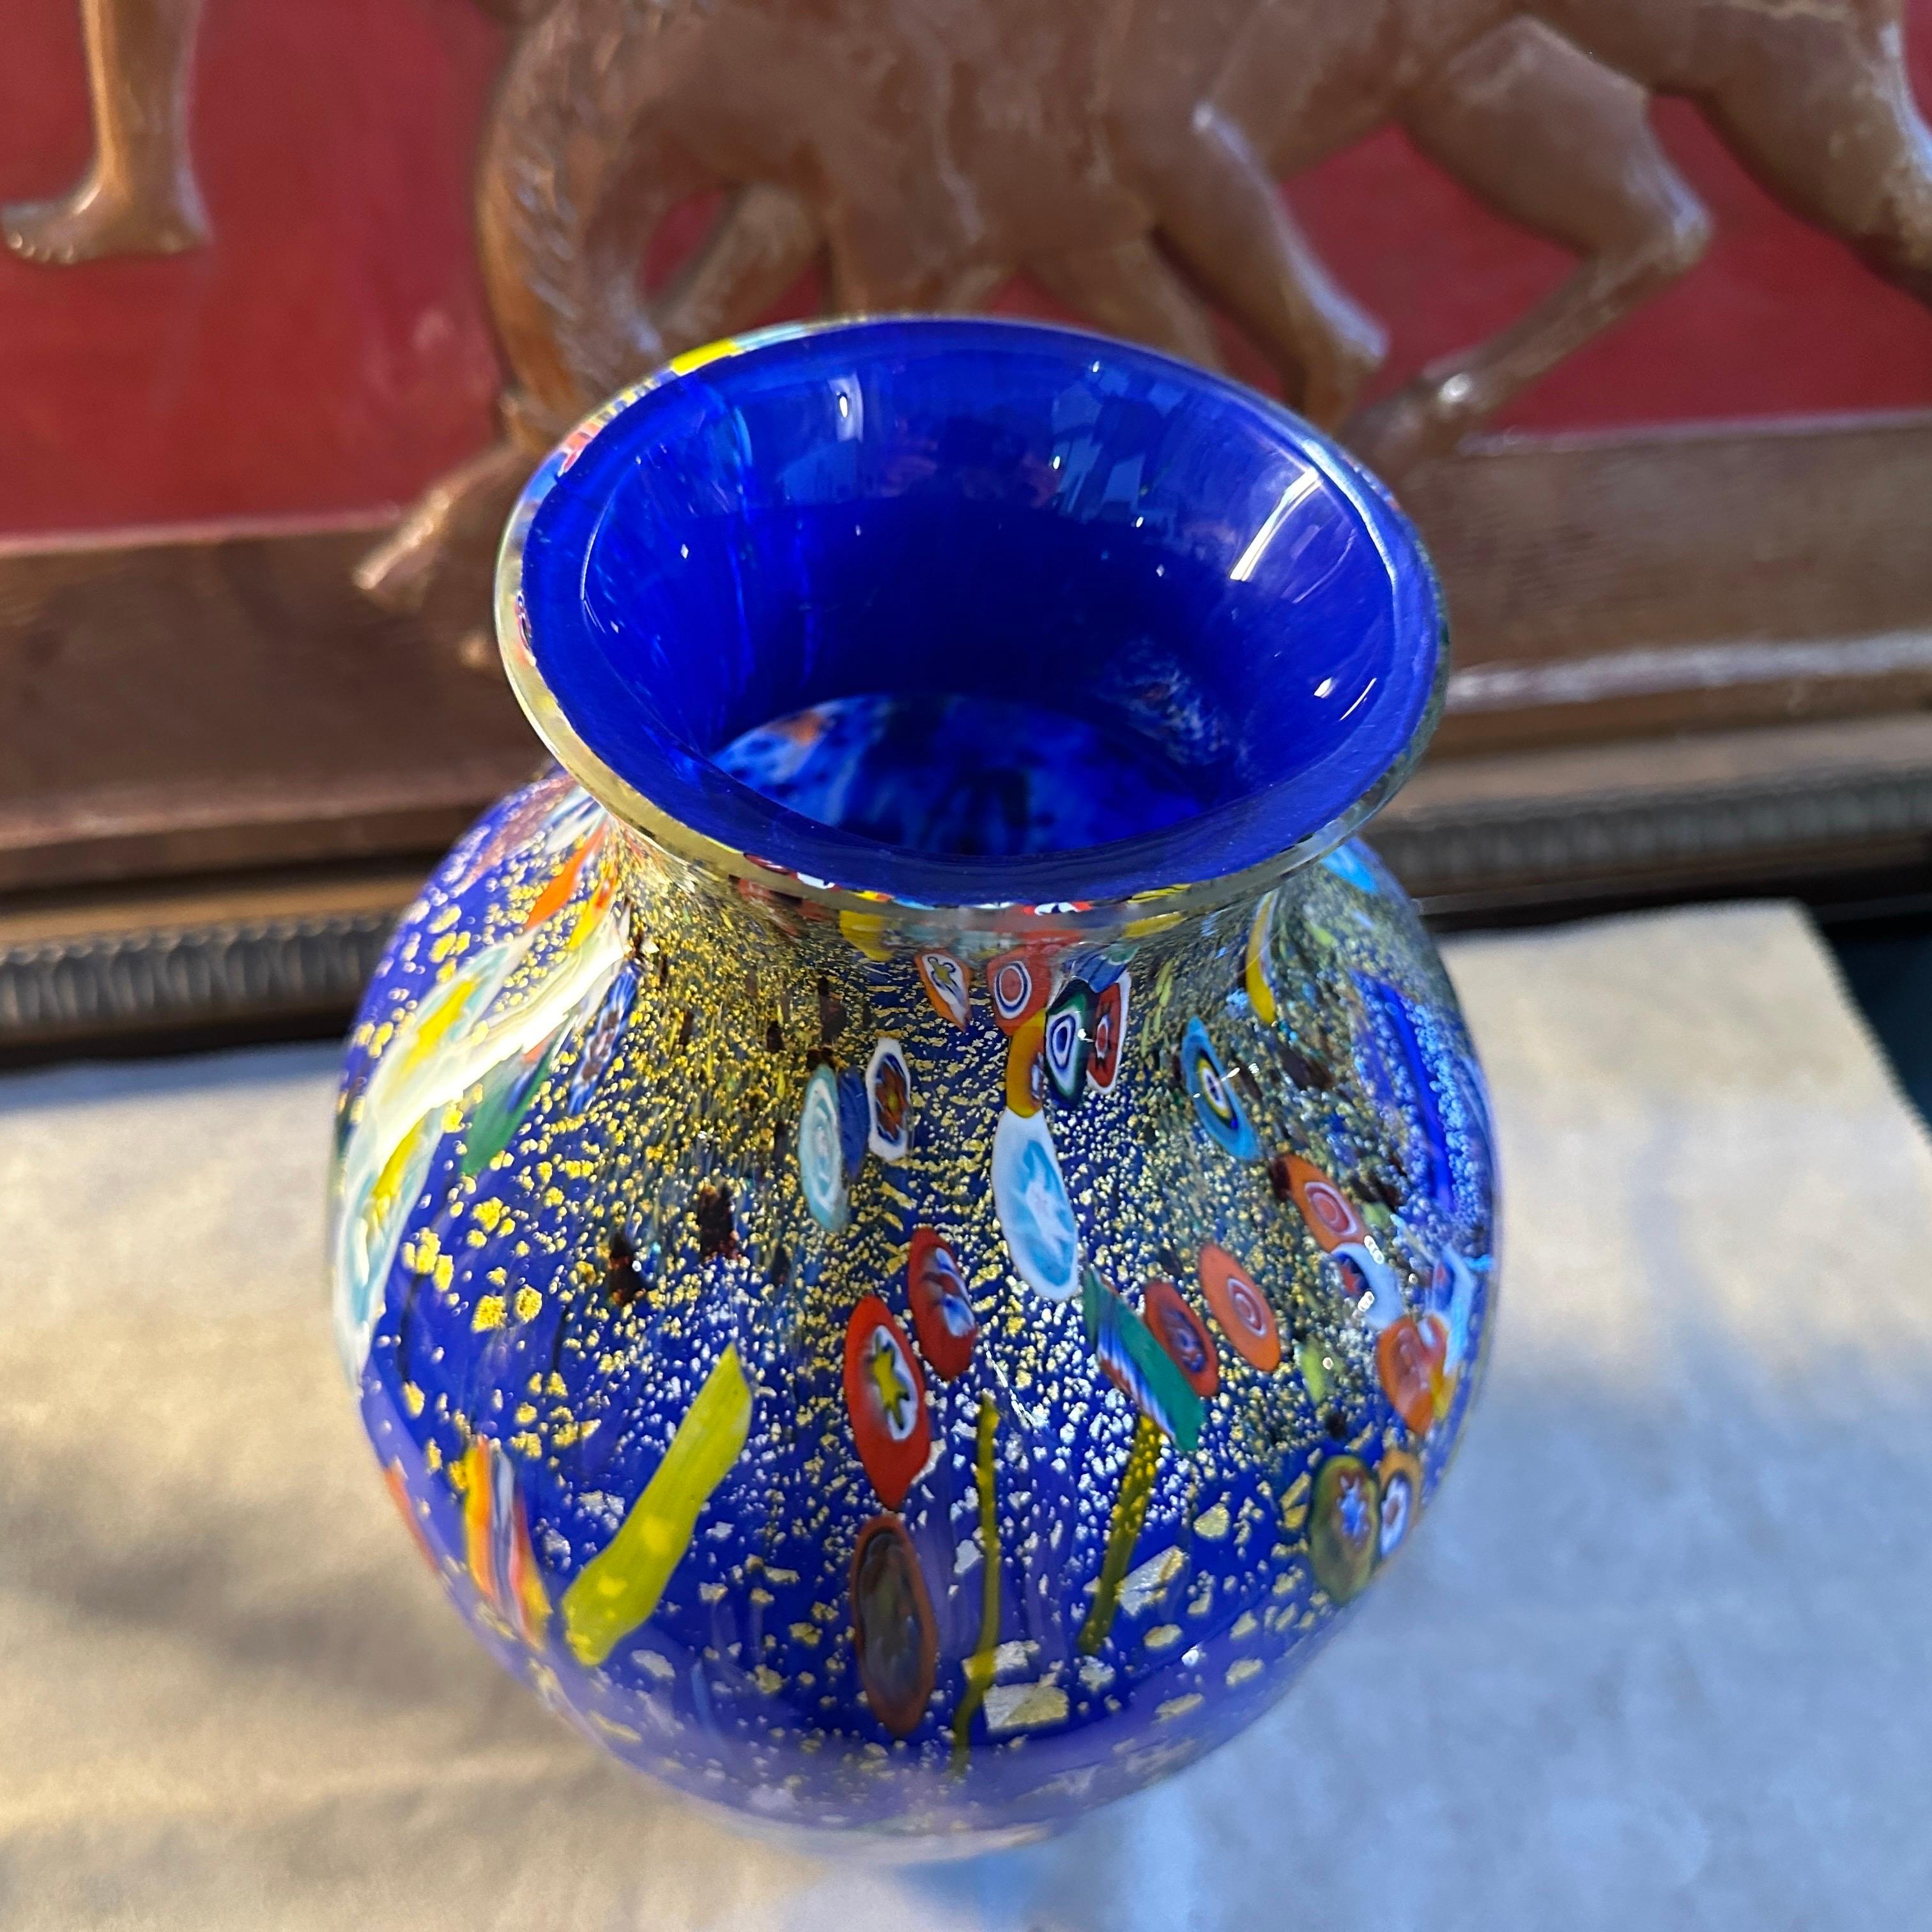 1980s Dino Martens Style Modernist Blue Murano Glass with Murrine Inserts Vase For Sale 1